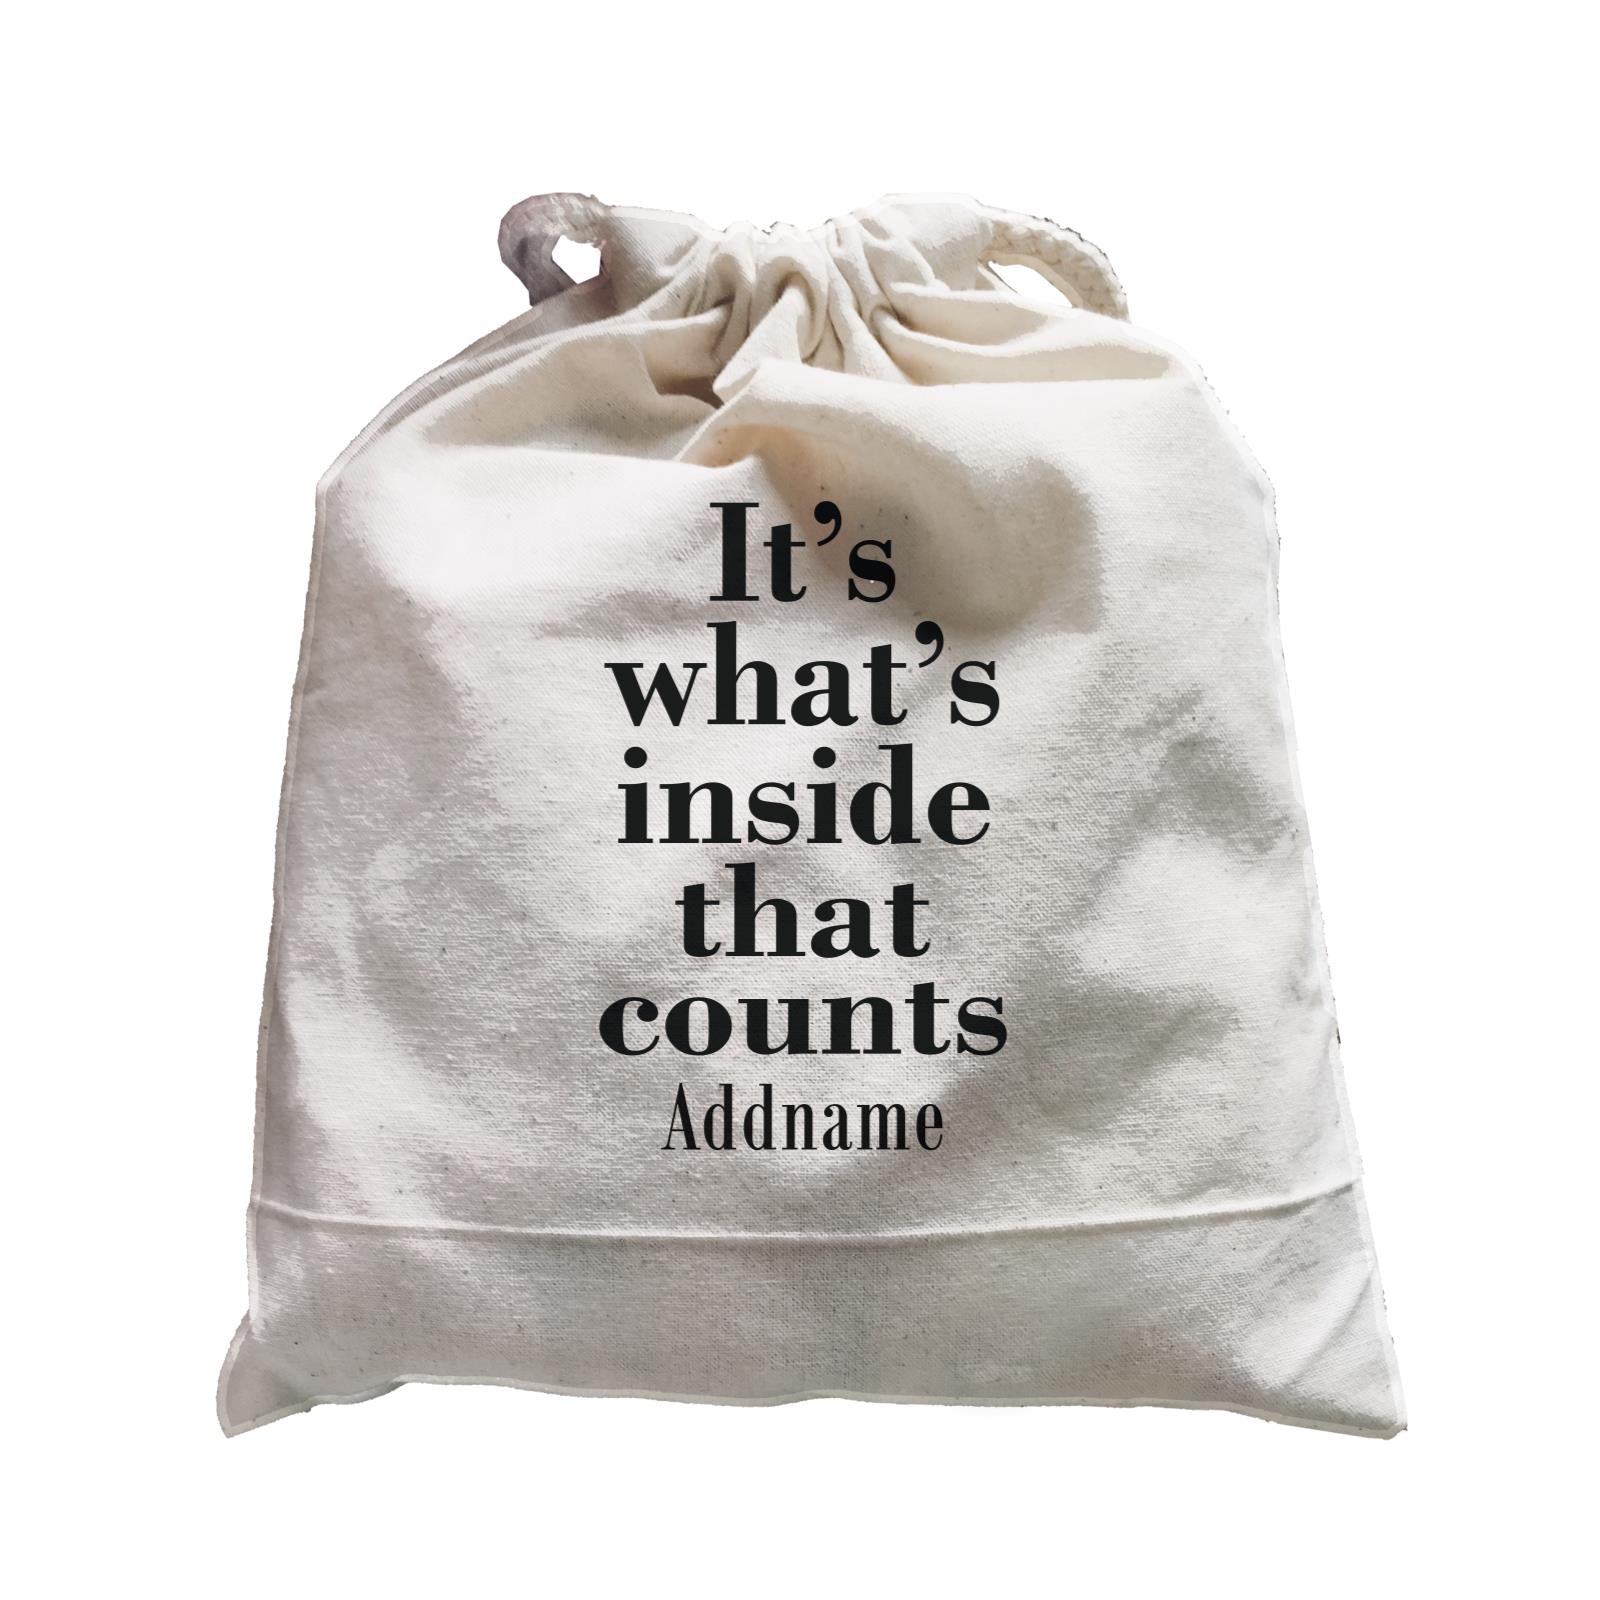 Inspiration Quotes It's What's Inside That Counts Addname Satchel